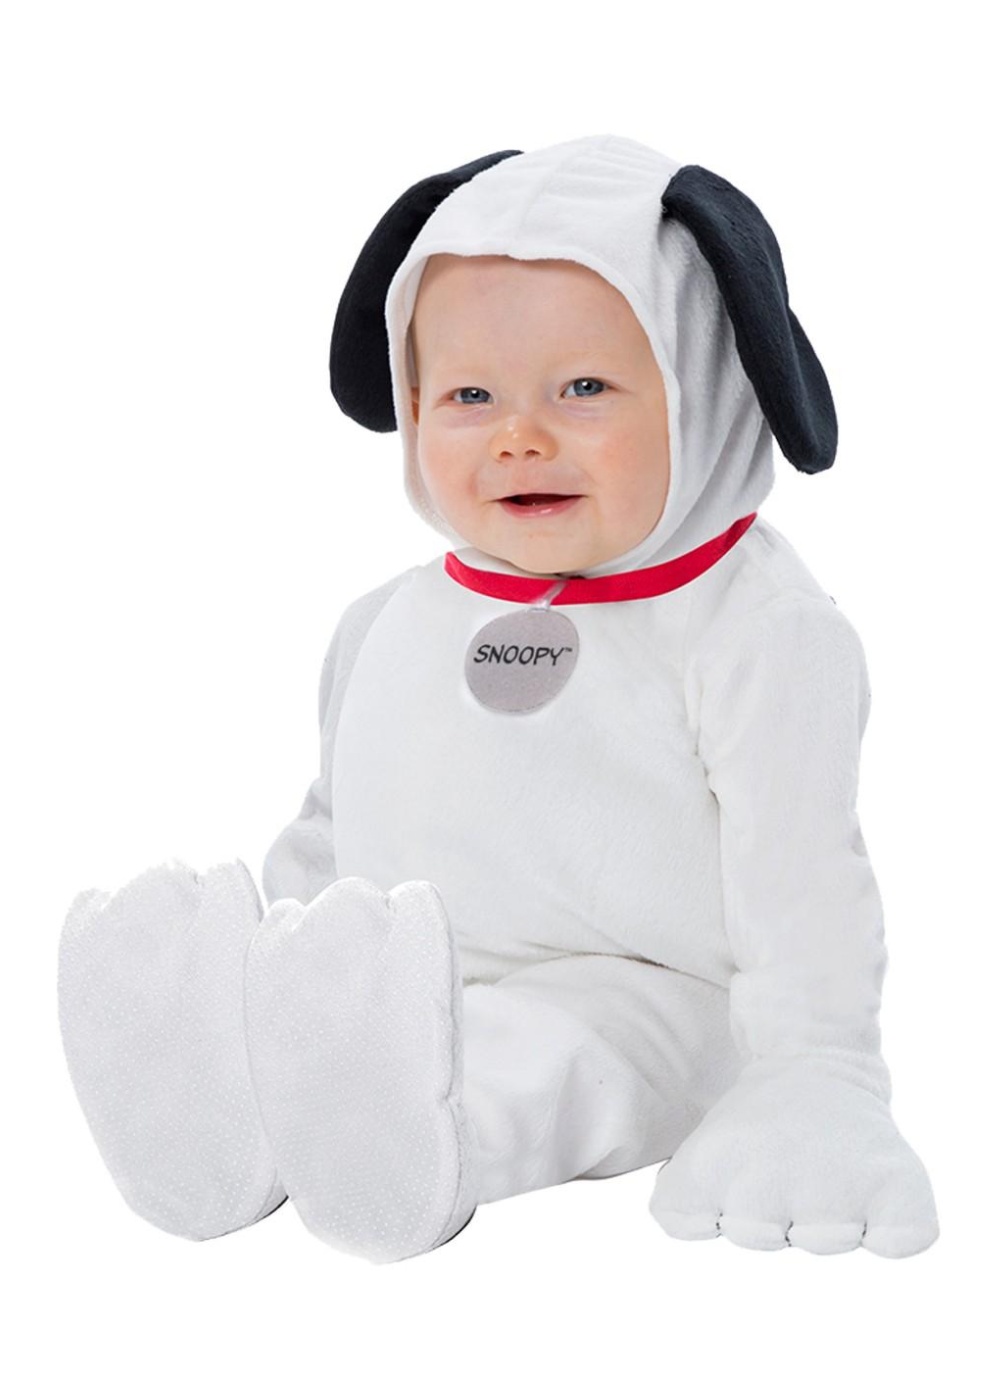 Peanuts Snoopy Baby Costume - TV Show Costumes